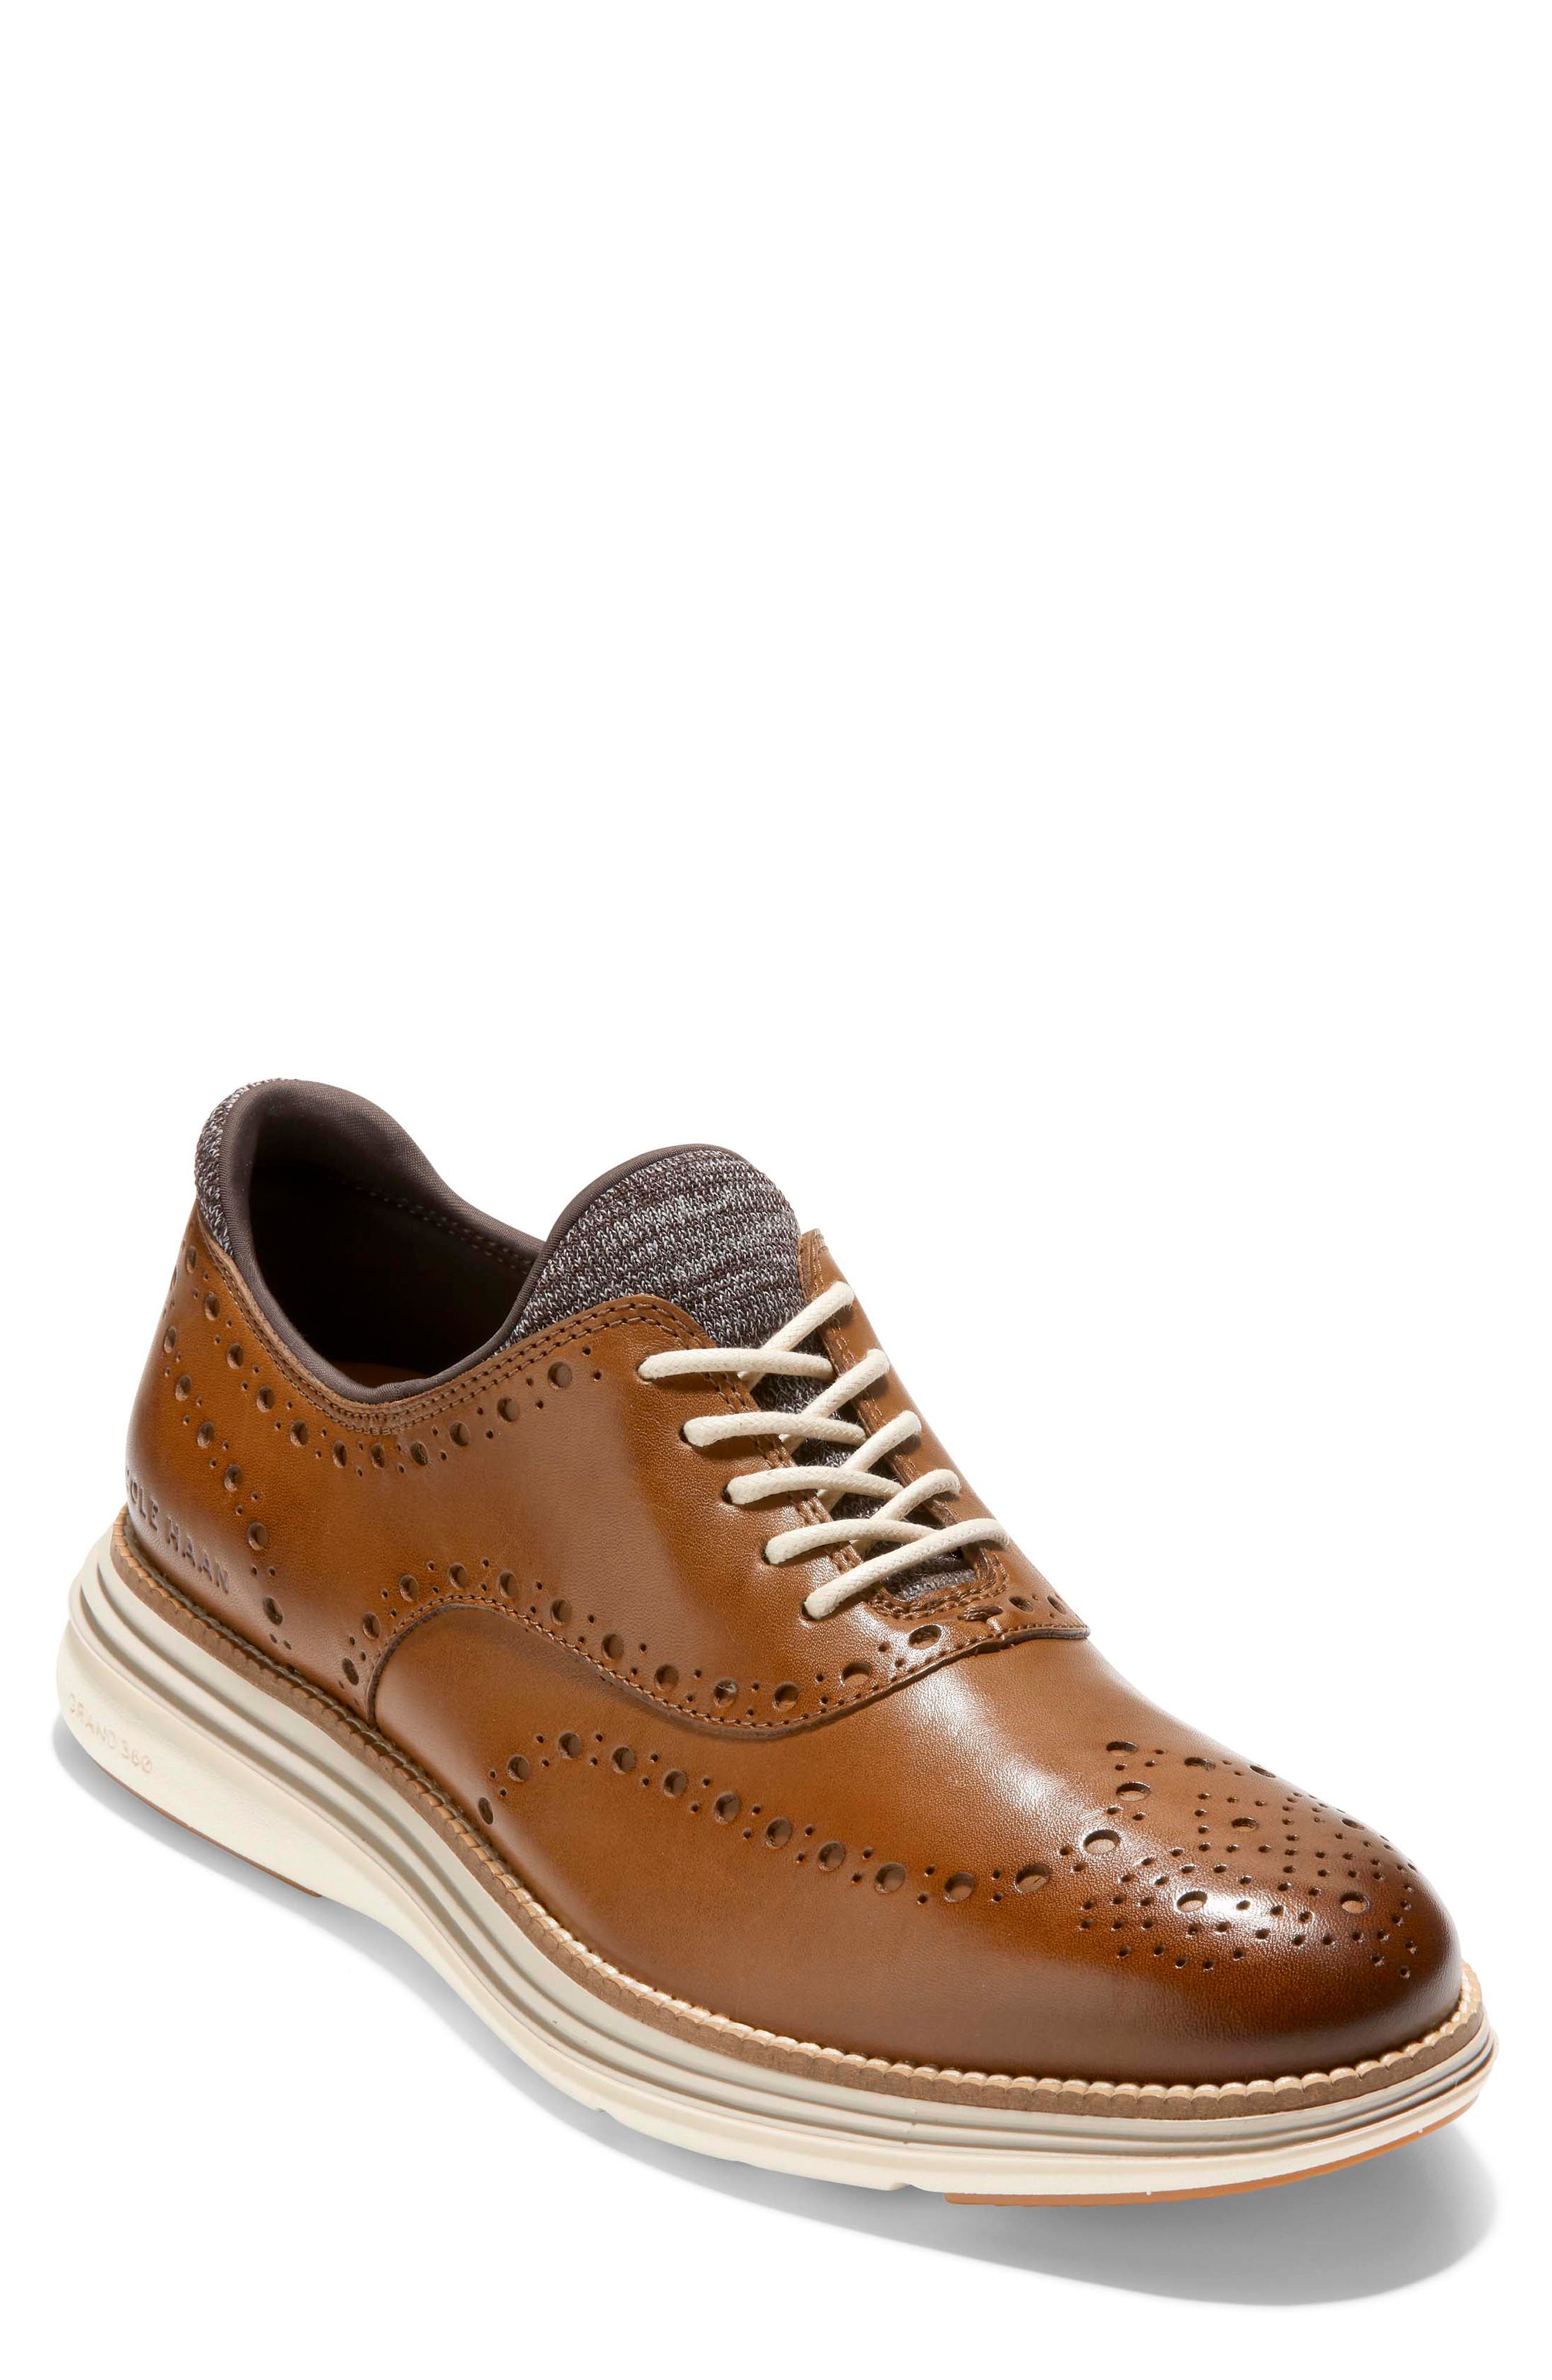 nordstrom men's casual shoes